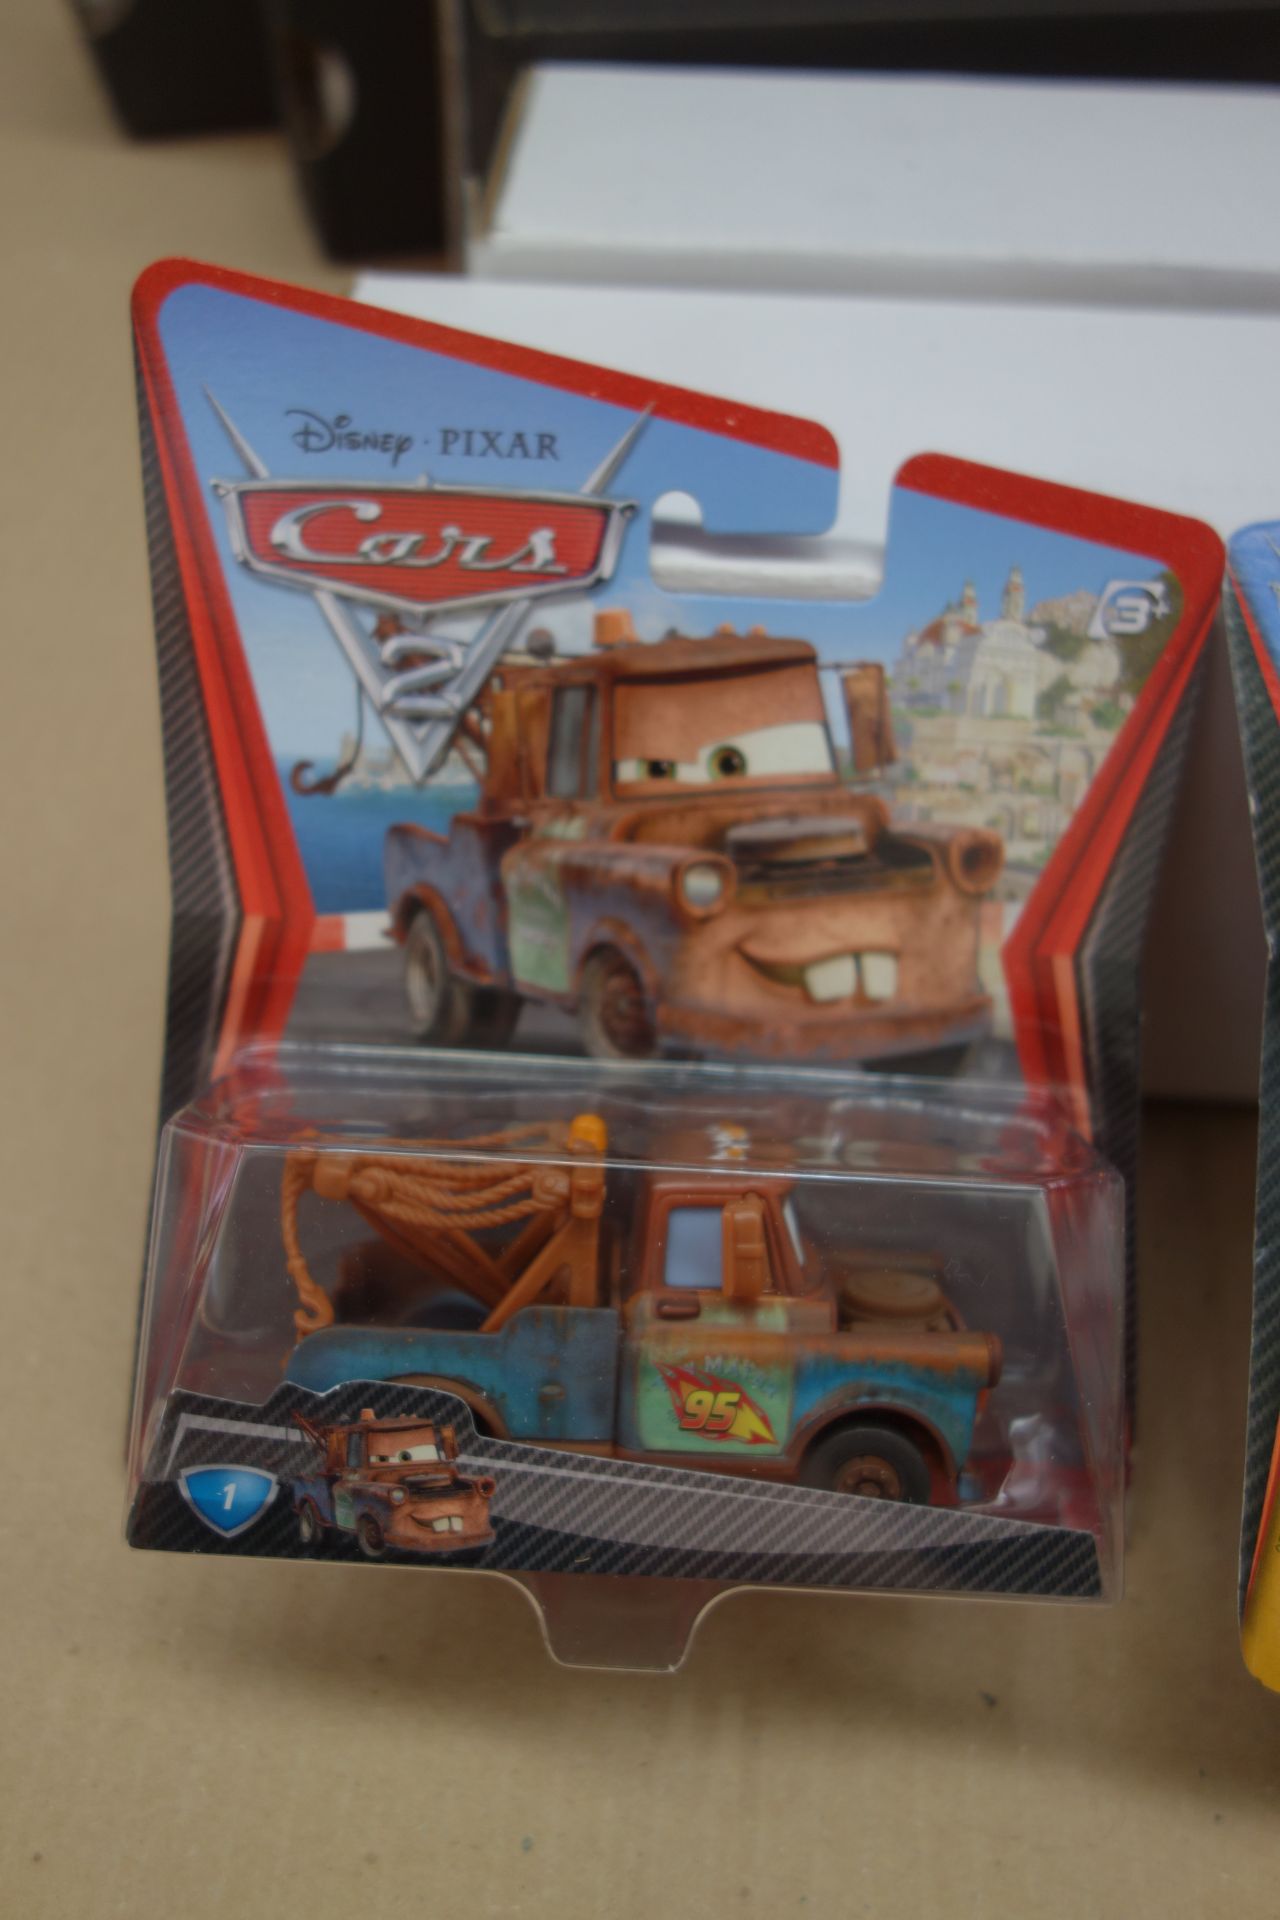 48 x Disney Pixar Cars 2 Race Team Mater Die Cast Truck. RRP £14.99 each, giving this lot a total